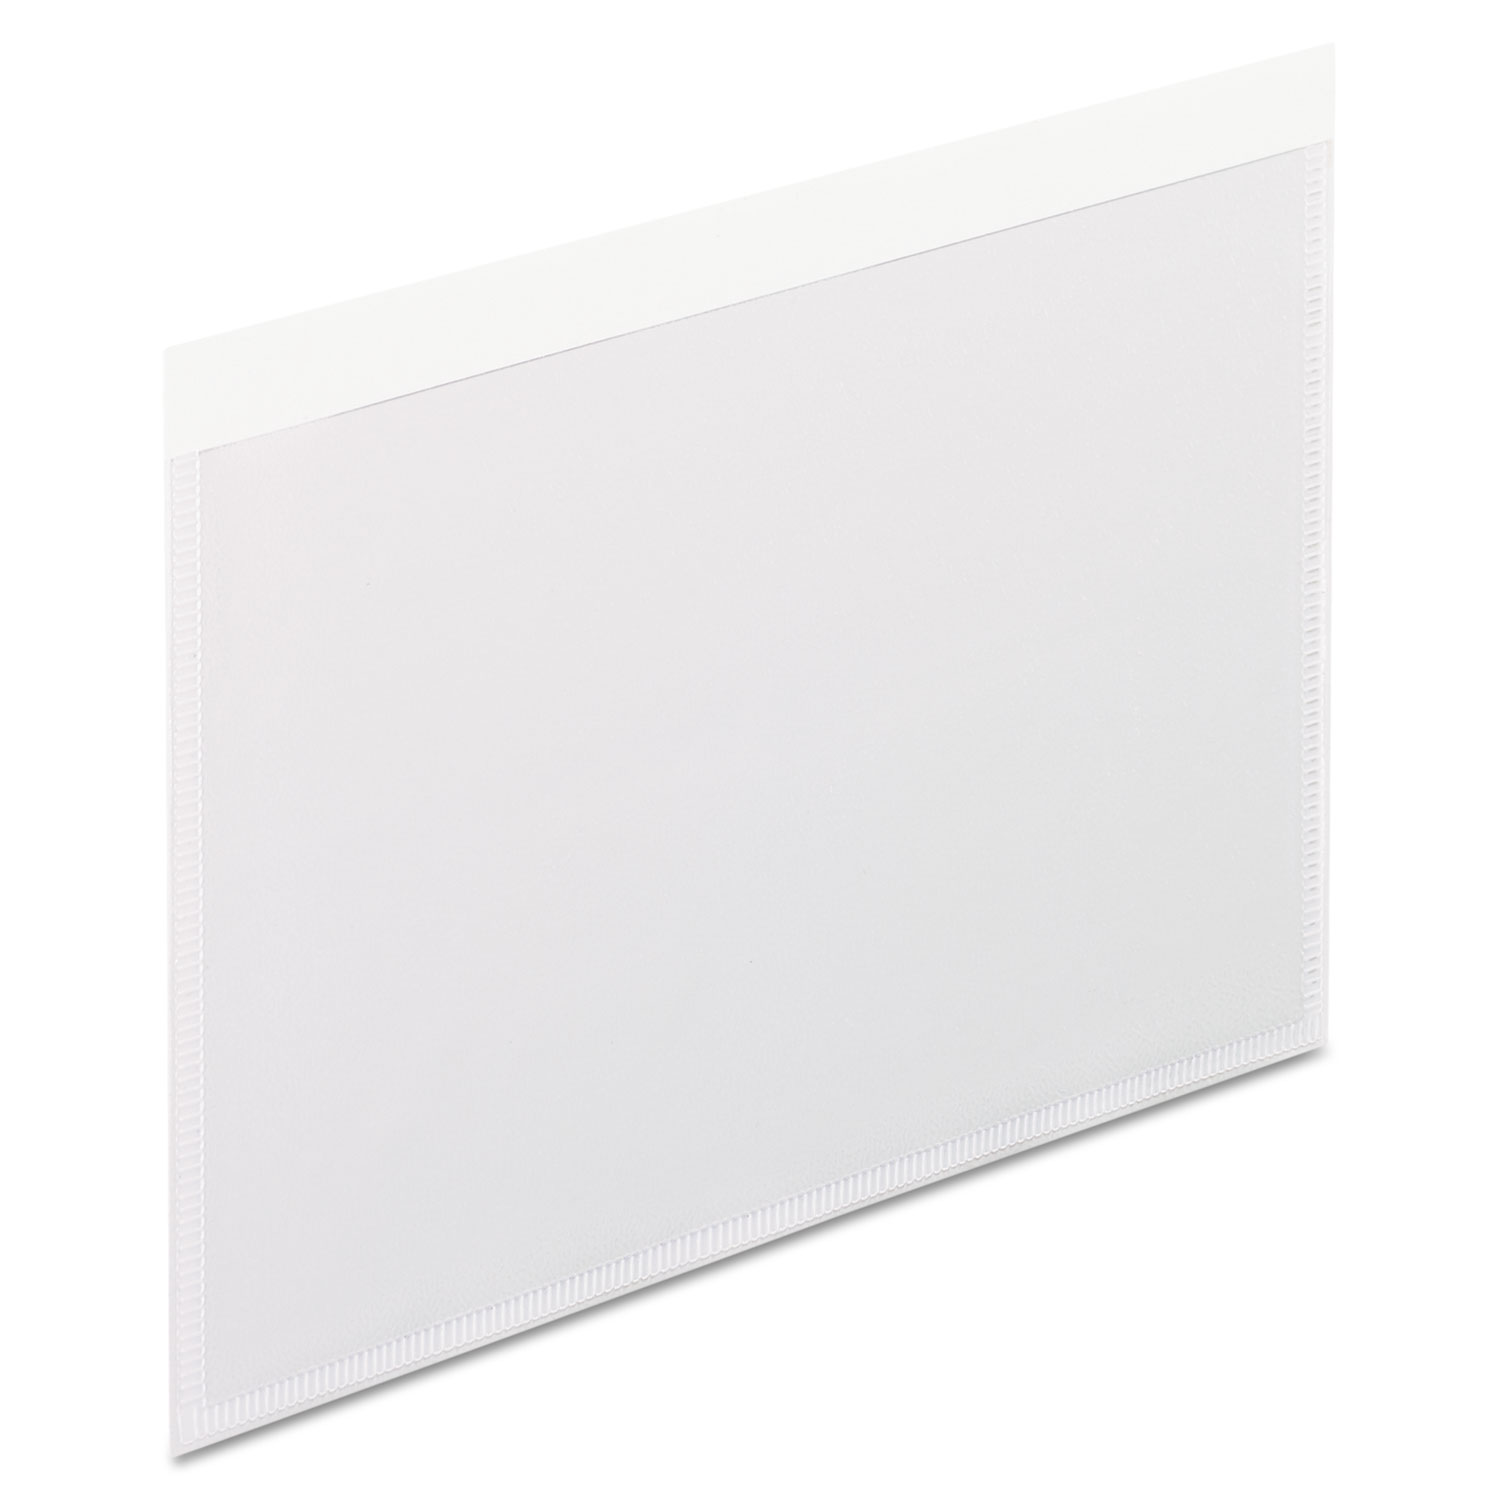  Pendaflex 99376 Self-Adhesive Pockets, 4 x 6, Clear Front/White Backing, 100/Box (PFX99376) 